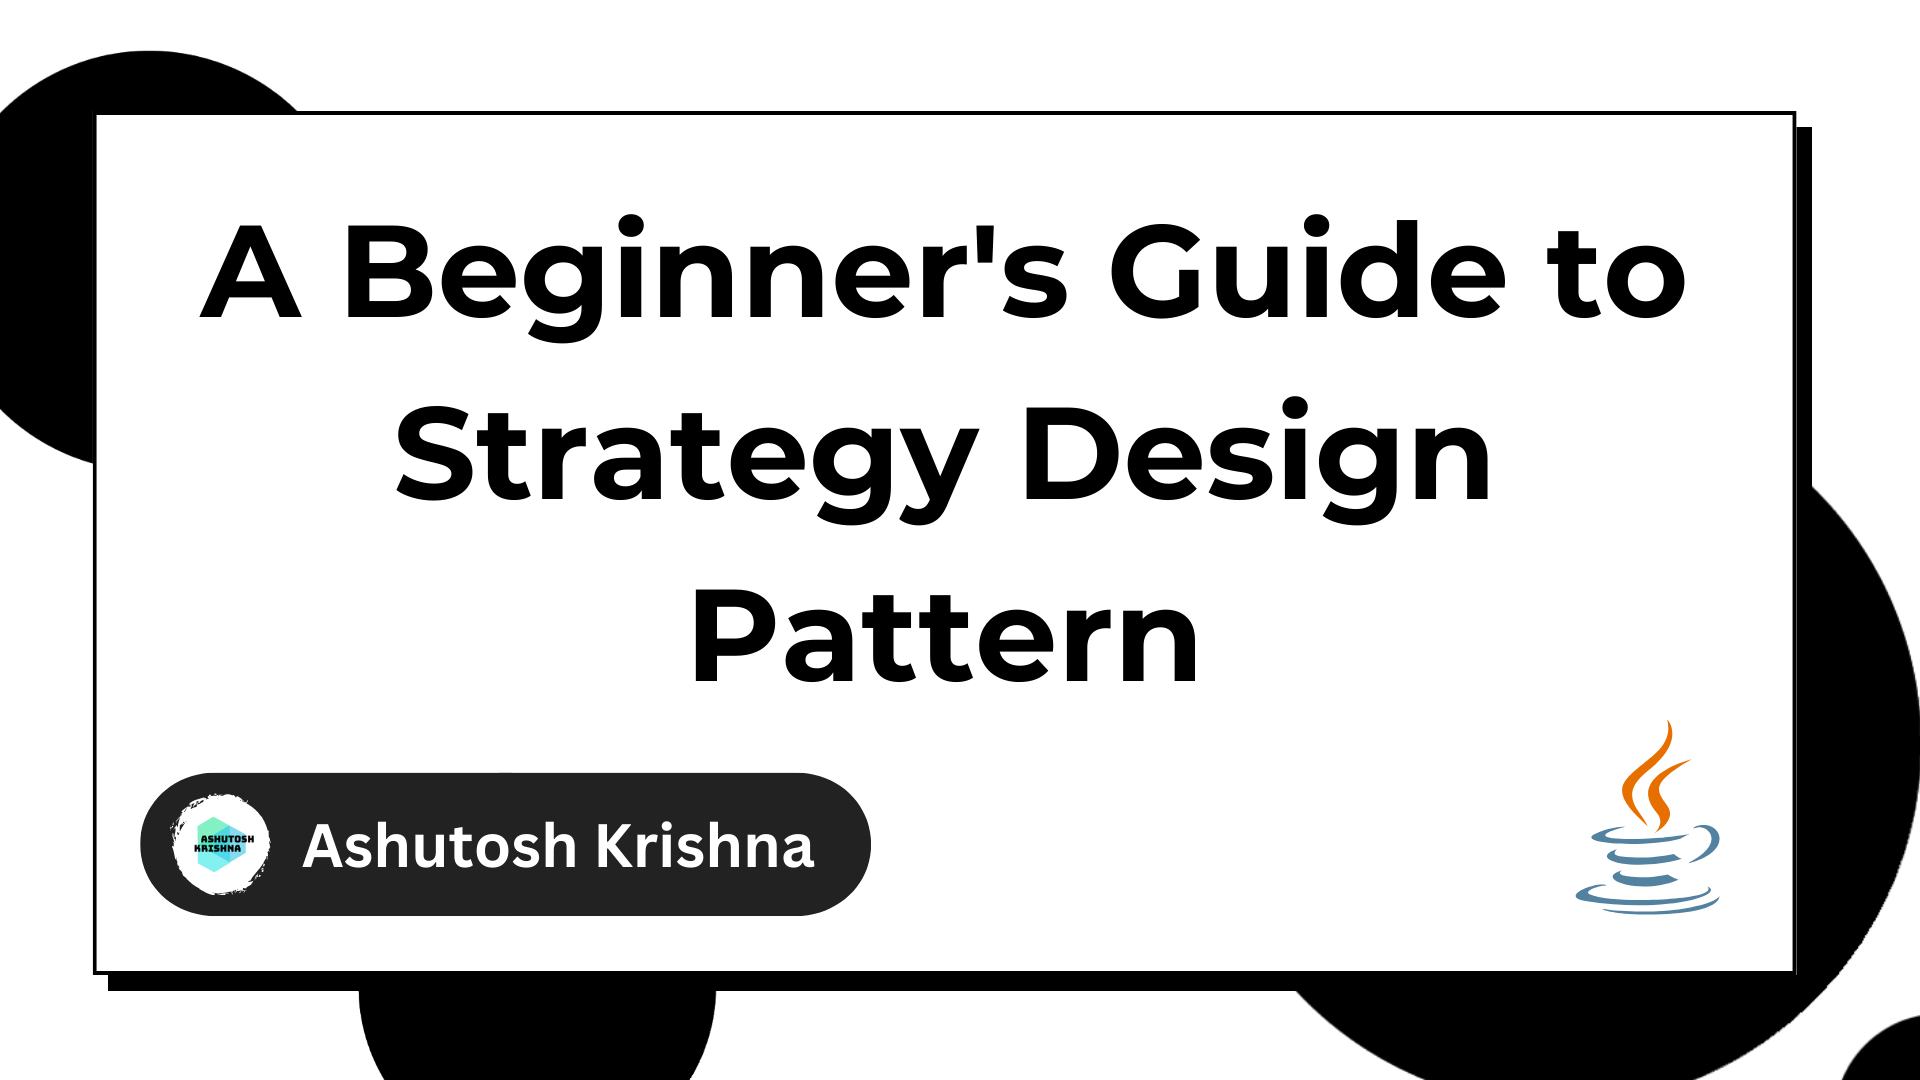 A Beginner's Guide to Strategy Design Pattern